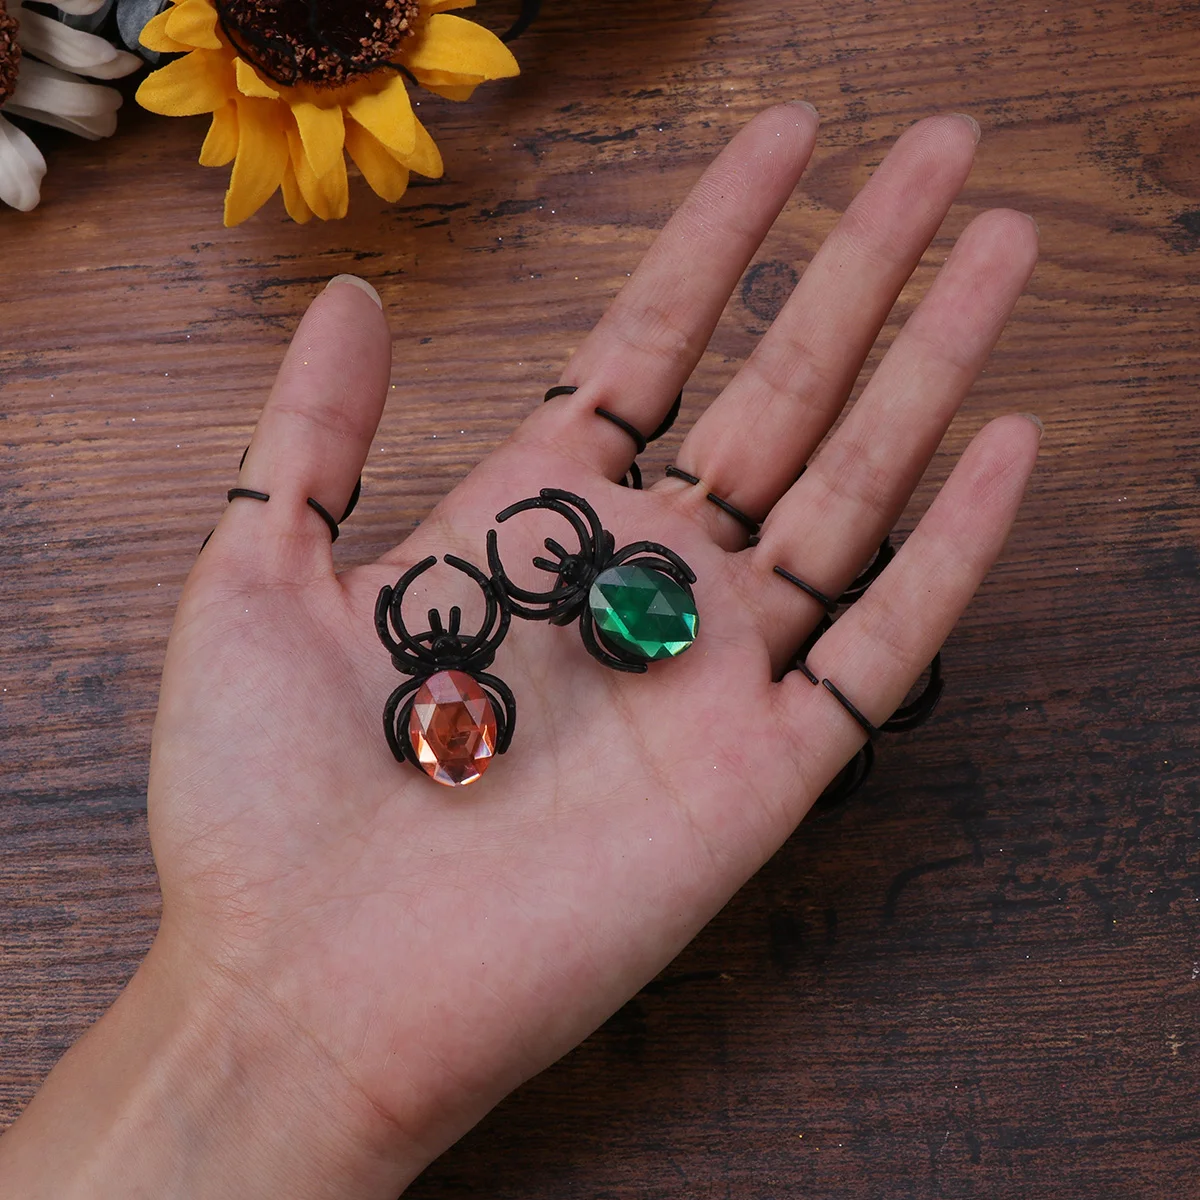 

Halloween Finger Ring Plastic Diamond Spider Ring Toys Kids Gifts Party Favors Decorations Jewelry Accessories